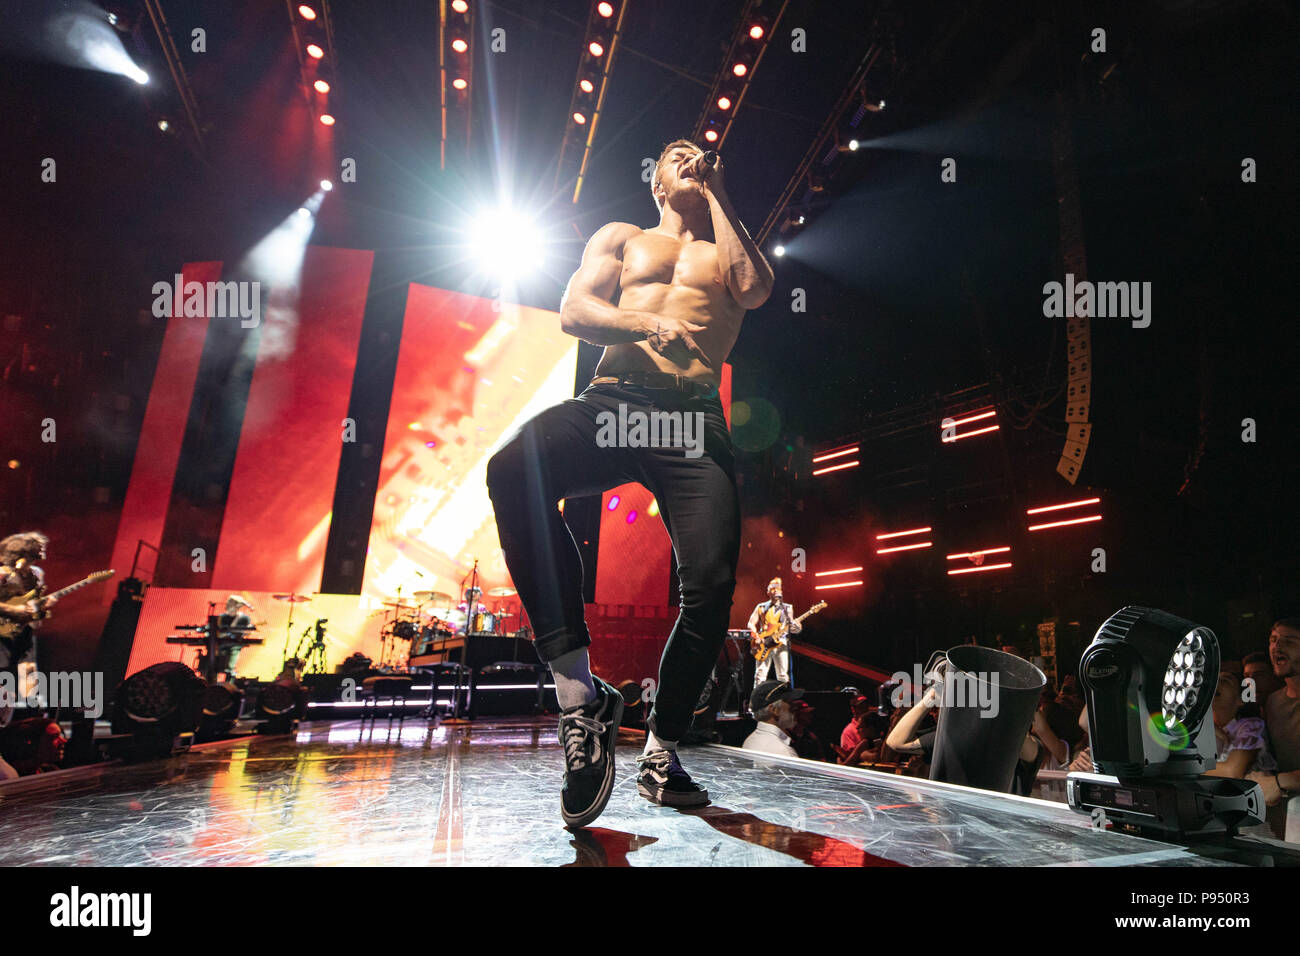 Tinley Park, Illinois, USA. 13th July, 2018. DAN REYNOLDS and BEN MCKEE of Imagine Dragons during the Evolve World Tour at Hollywood Casino Amphitheater in TInley Park, Illinois Credit: Daniel DeSlover/ZUMA Wire/Alamy Live News Stock Photo